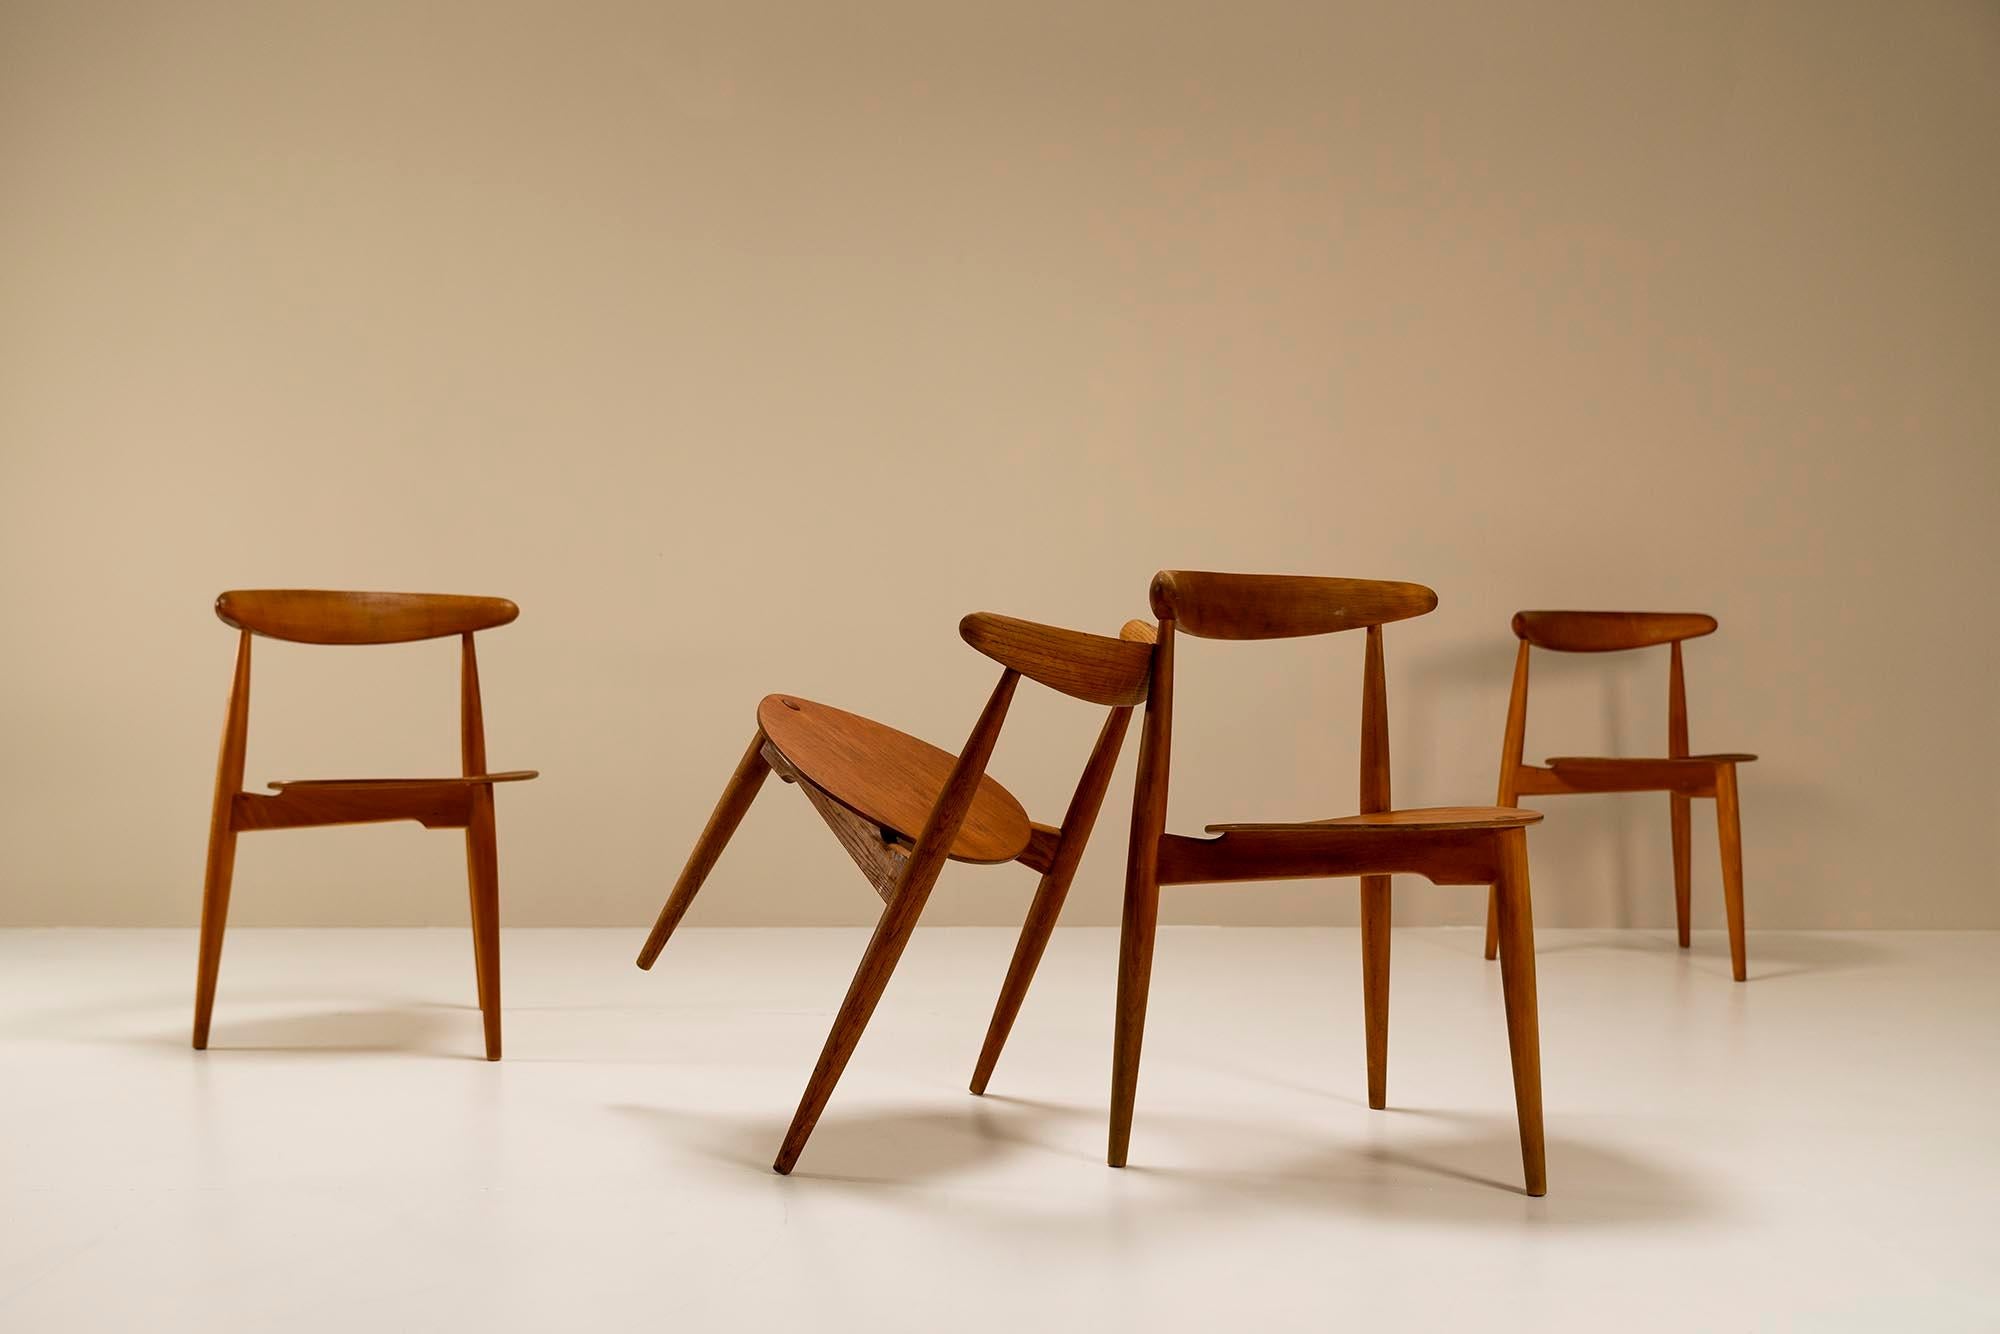 Beautiful set of four 'Heart' dining chairs by Hans Wegner, model FH4103. These are designed in 1953 and manufactured by Fritz Hansen. The chairs have three legs and a 'heart-shaped' seating area. They can be stacked and are practical around a